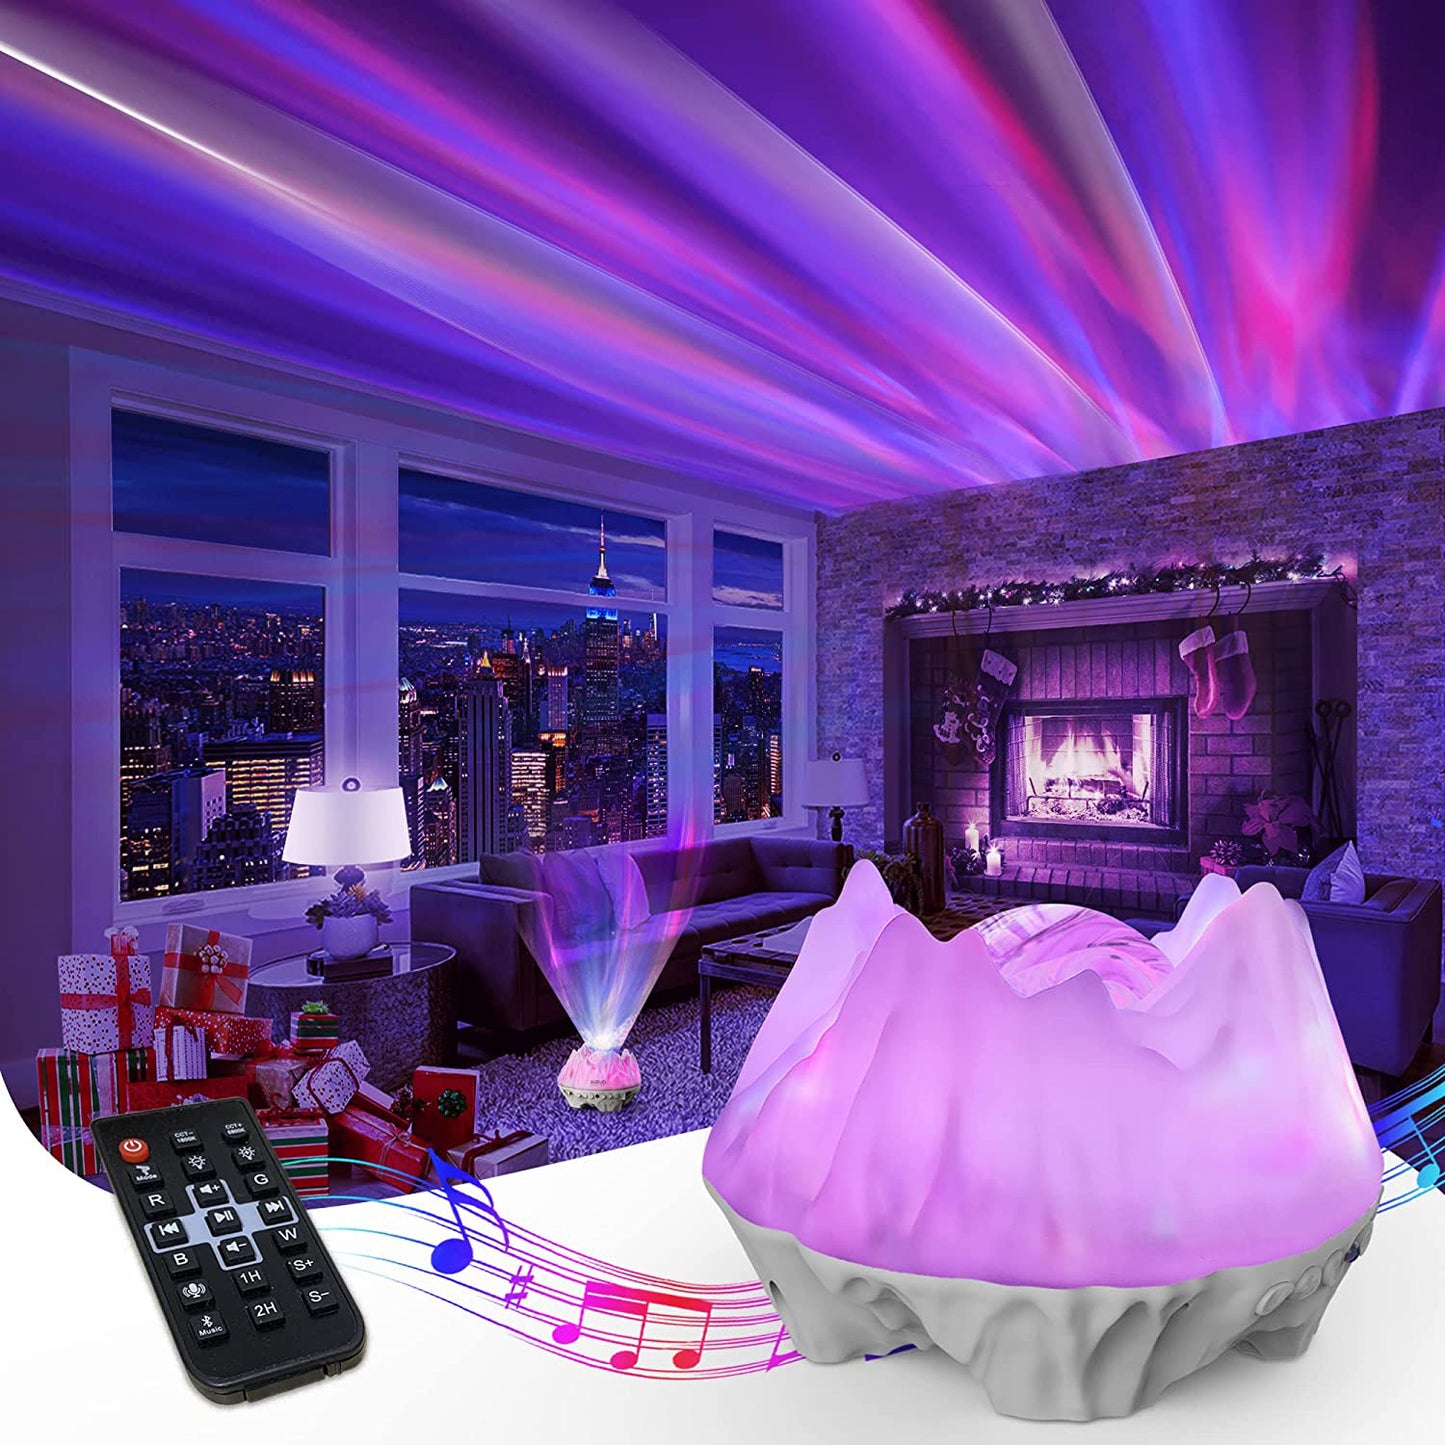 Galaxy Projector Star Projector Night Light Work with Alexa Google Home 8 in 1 Smart WiFi Music Galaxy Light Projector Bluetooth Remote Timer